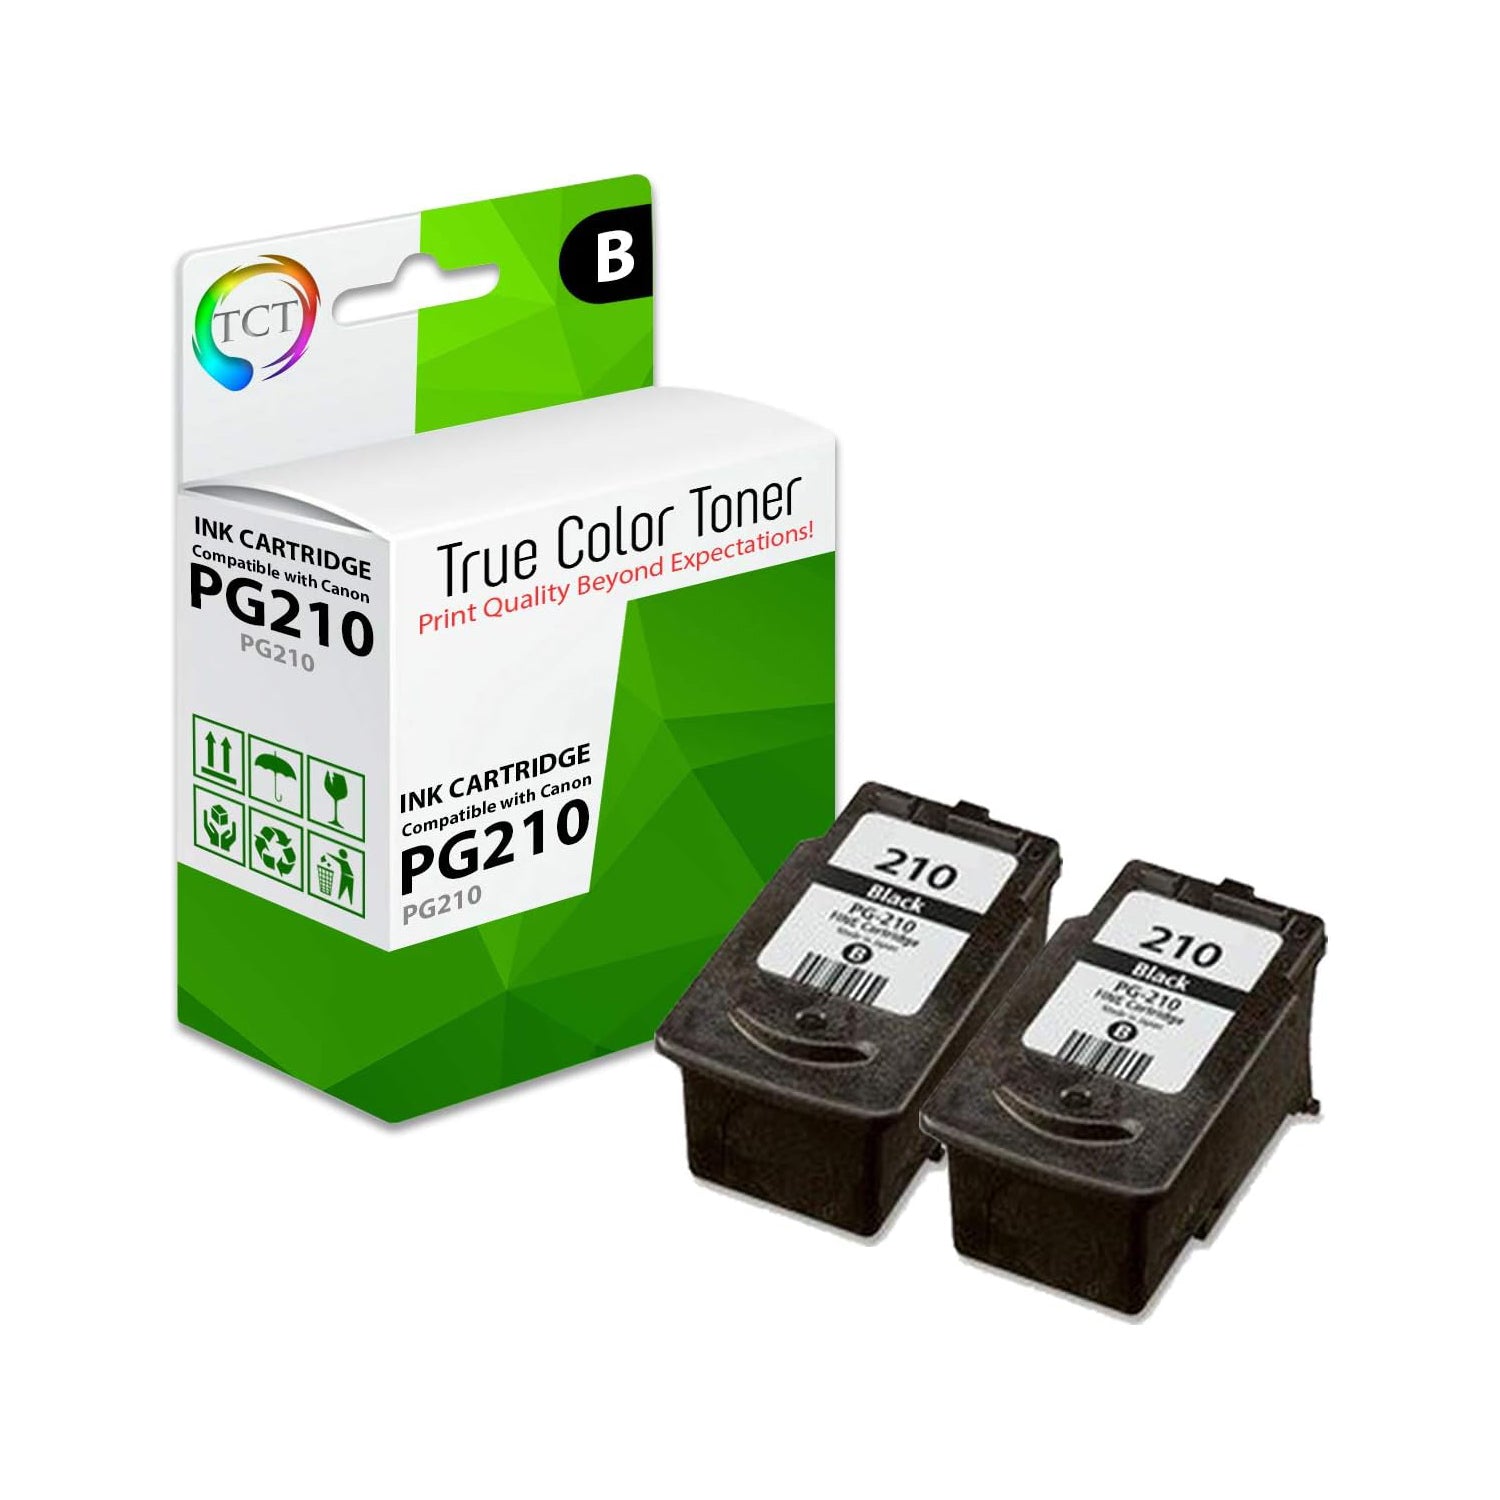 TCT Compatible Ink Cartridge Replacement for the Canon PG-210 Series - 2 Pack Black